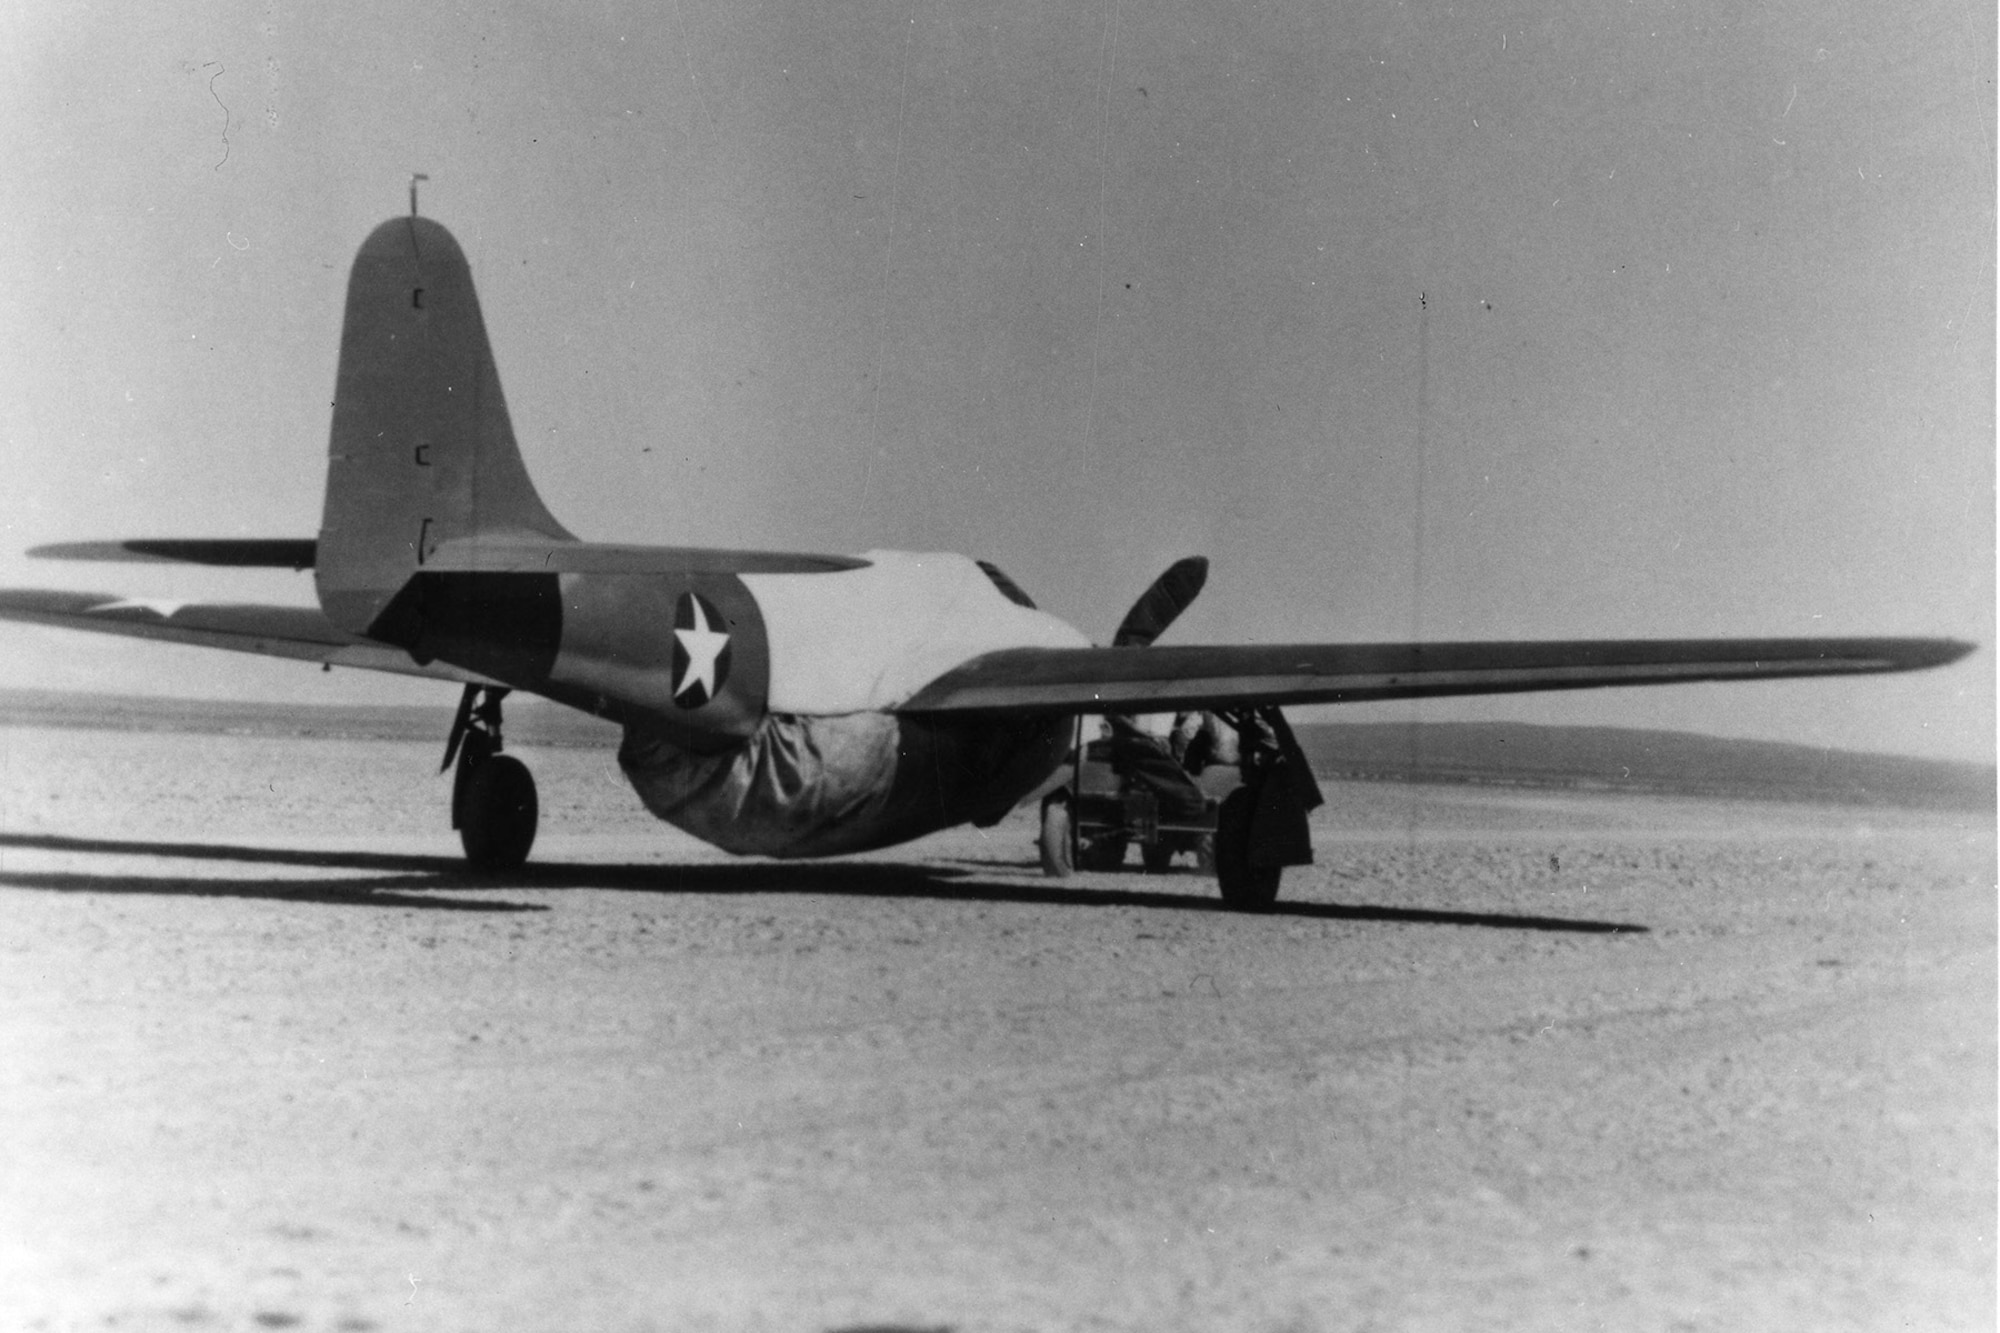 To maintain secrecy, prototype Airacomets were towed to and from the flightline with a fake propeller and a cover over the engine exhausts and intakes. (U.S. Air Force photo)